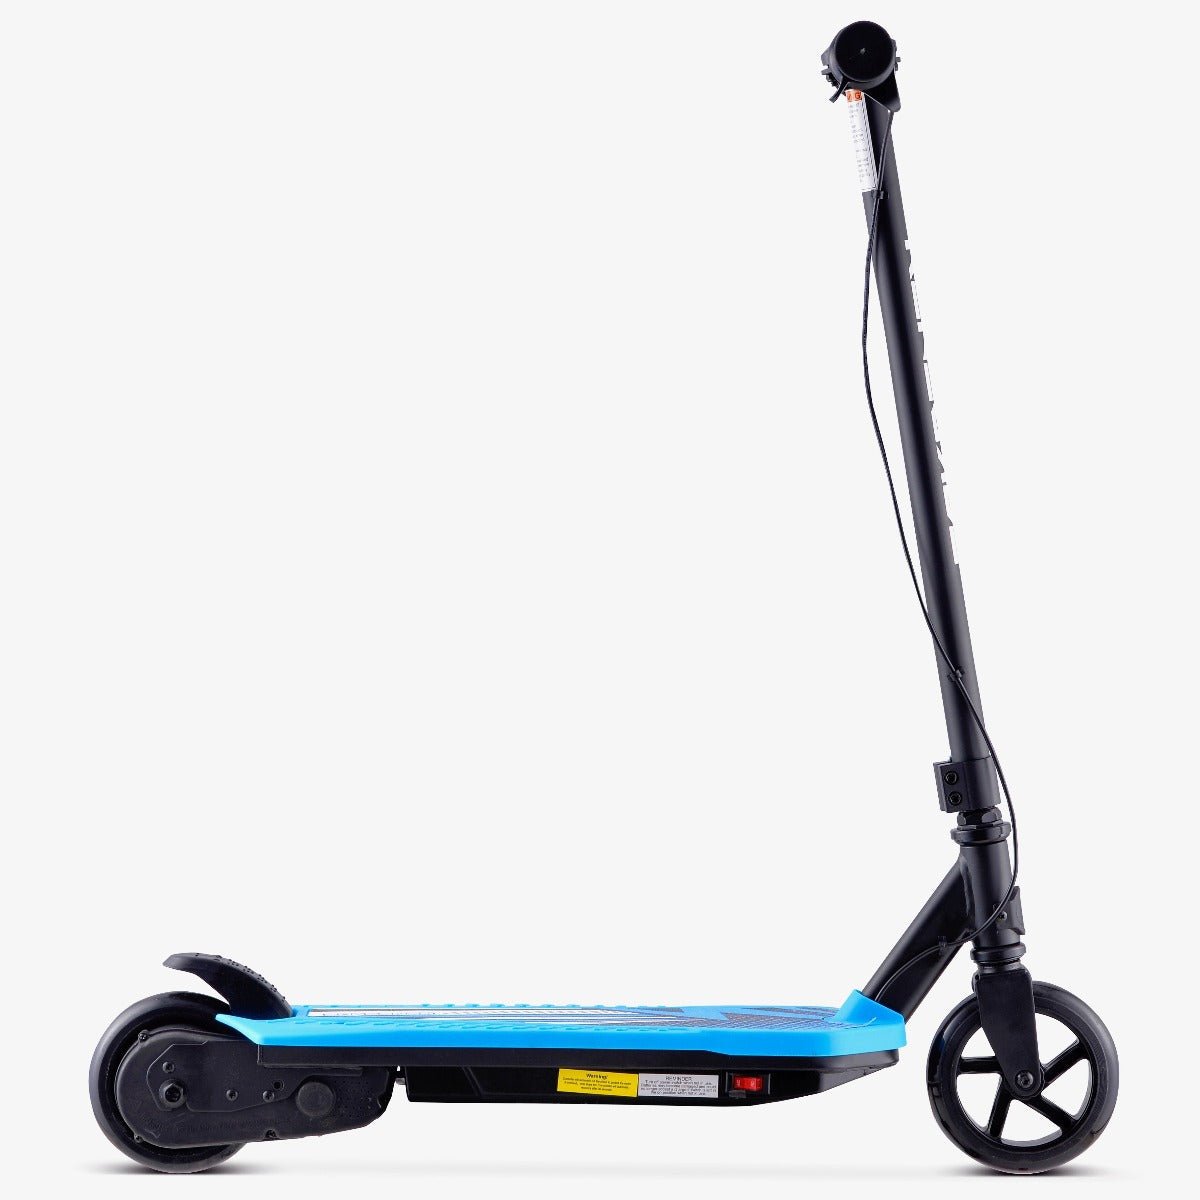 Renegade Neon 12V 80W Kids Electric Scooter - Blue